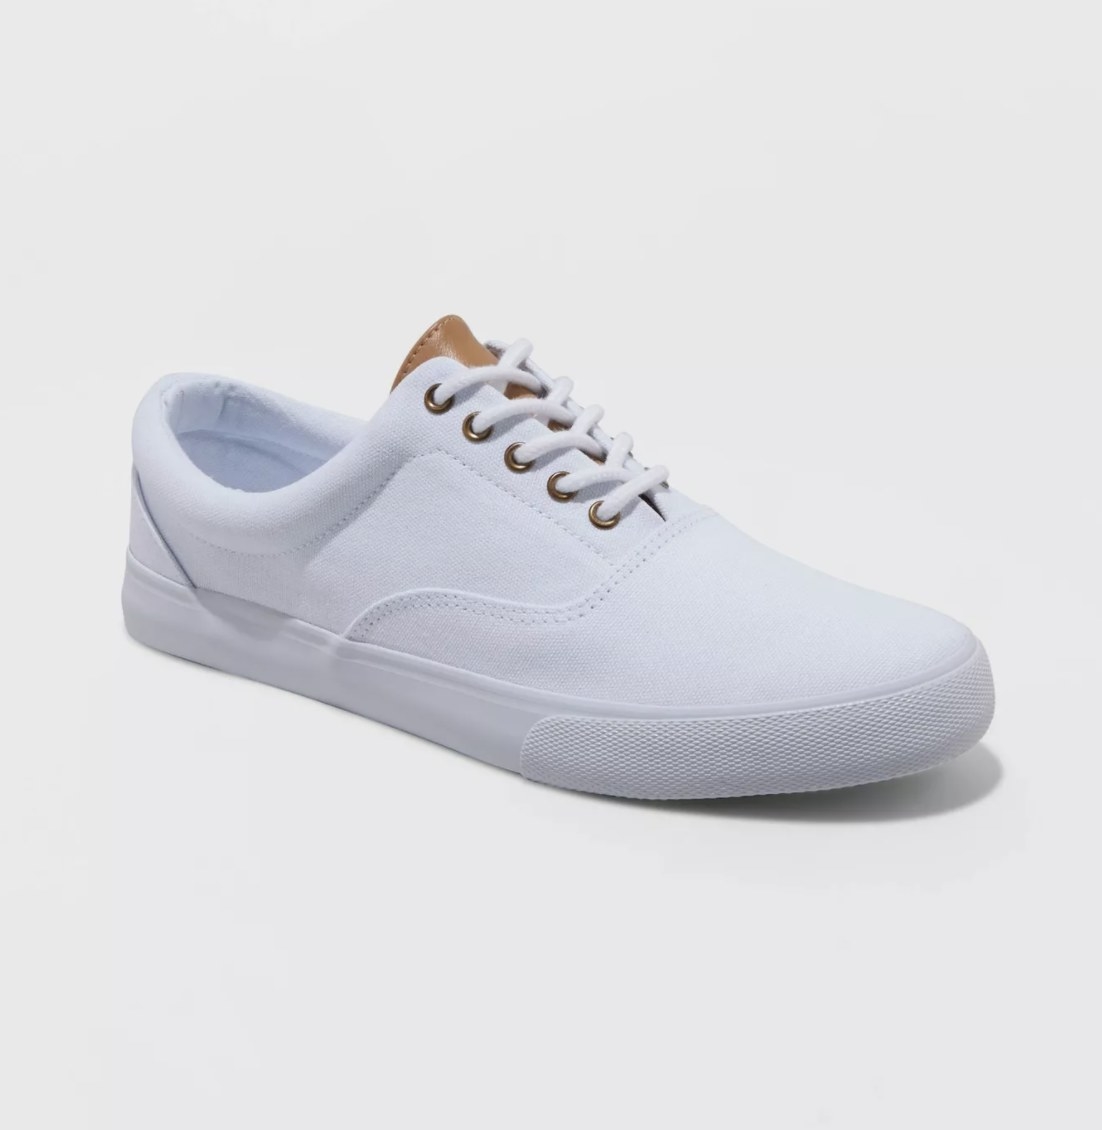 The white sneakers have a brown leather-like tongue and tonal laces